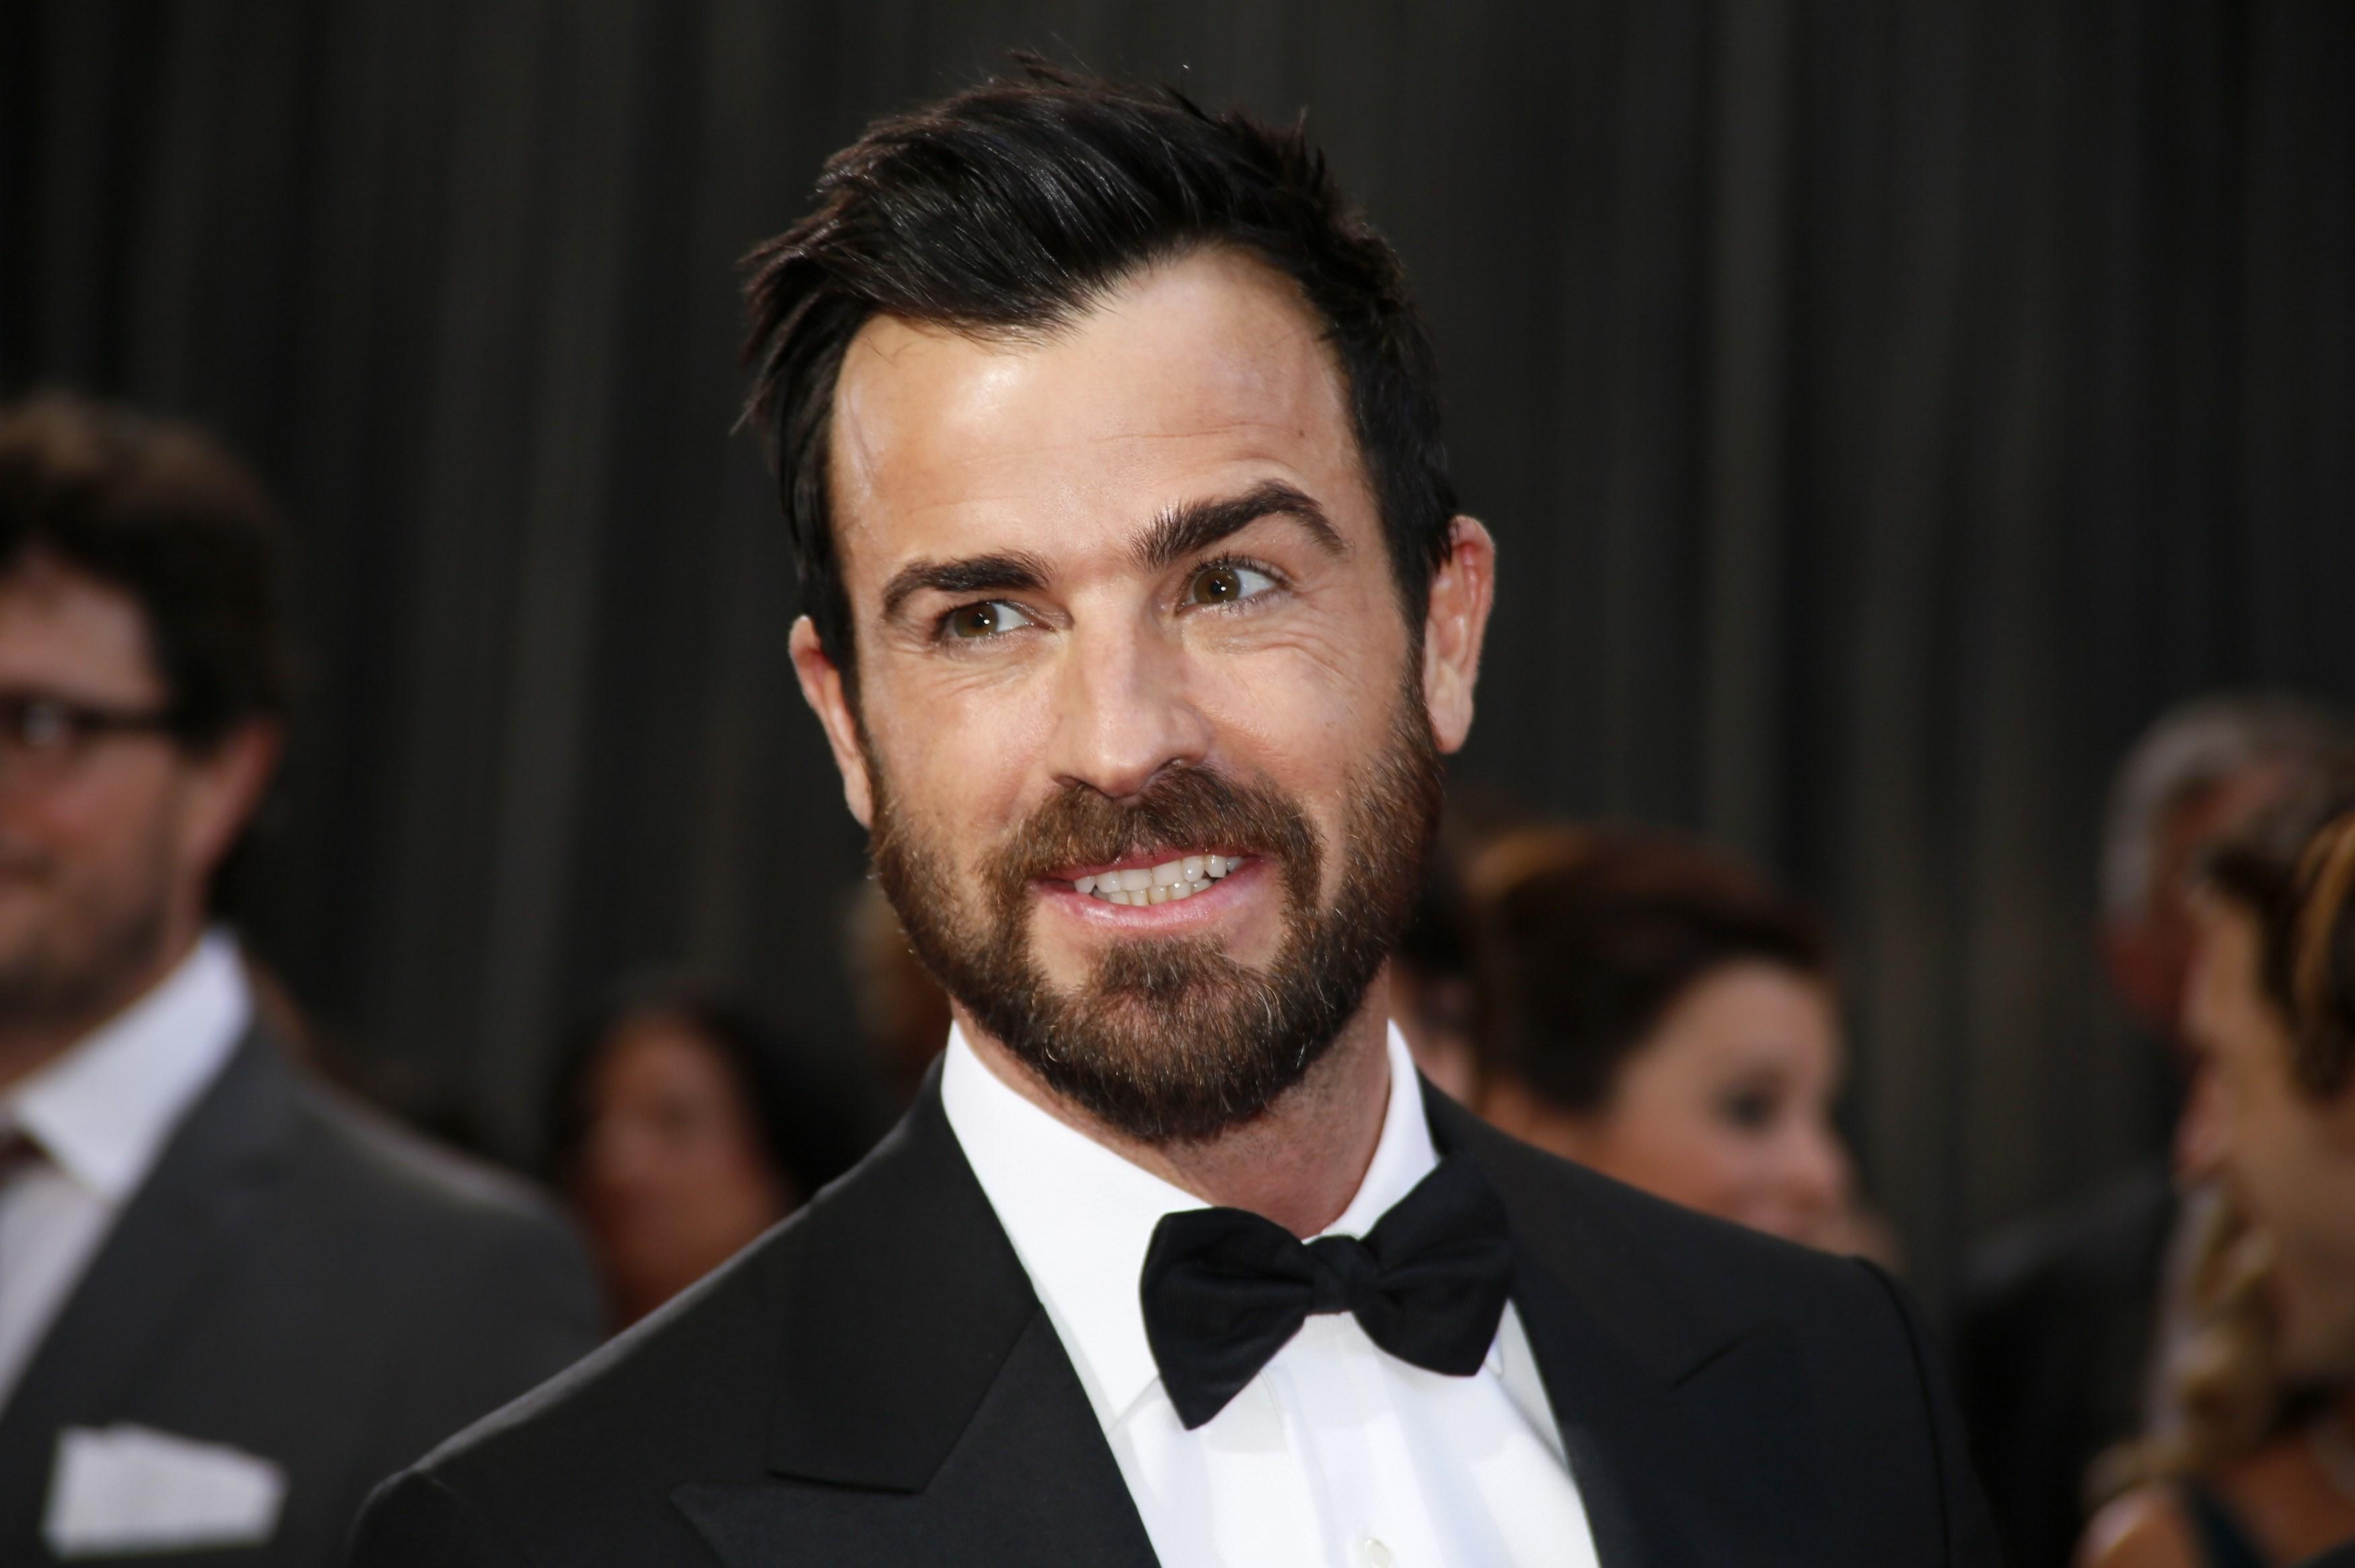 Justin Theroux. Known people people news and biographies